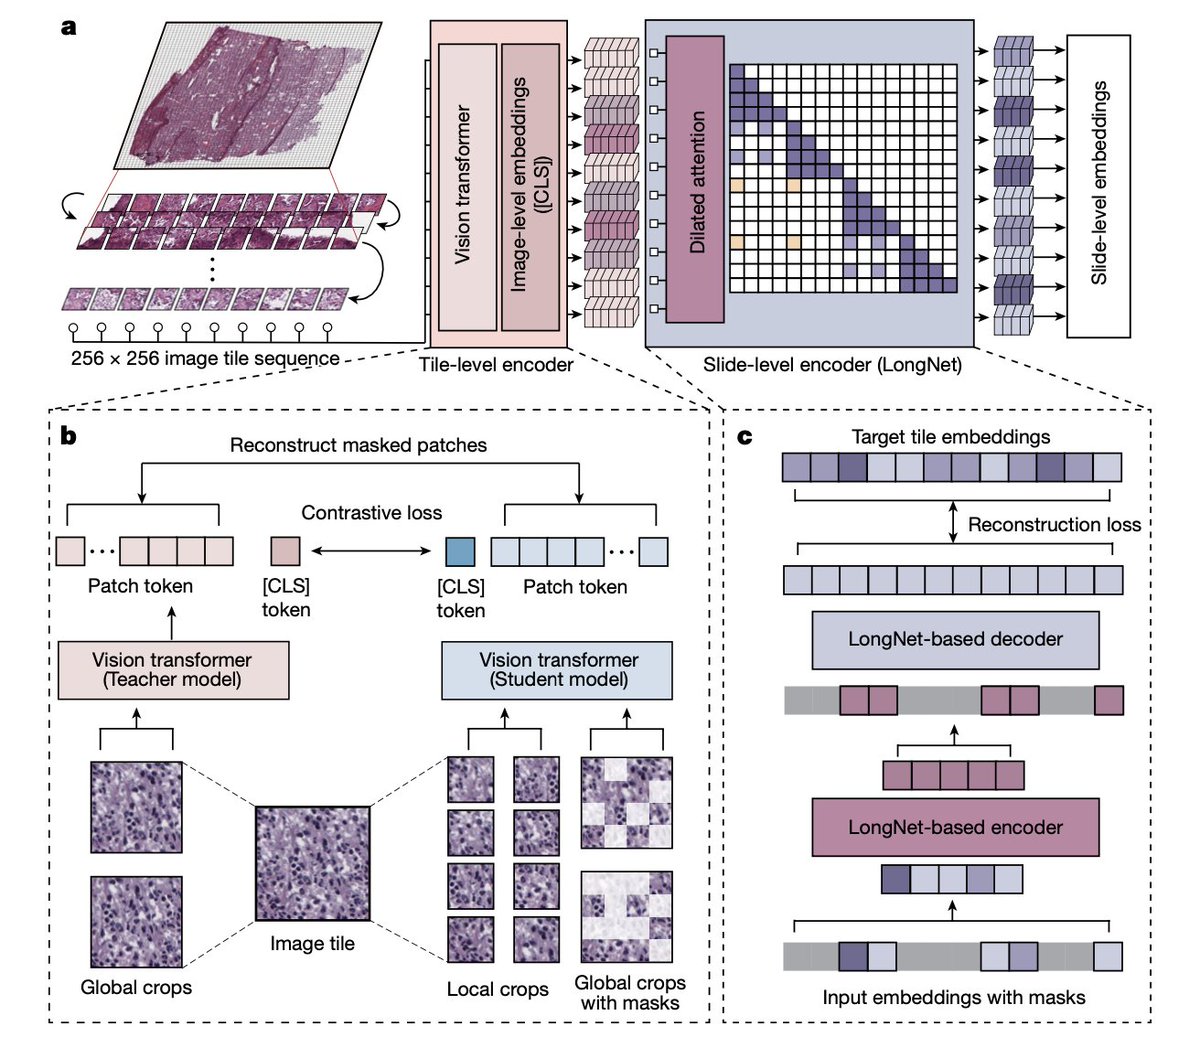 Just out @Nature The 1st whole-slide digital pathology #AI foundation model pre-trained on large-scale real-world data, from over 1.3 billion images, 30,000 patients nature.com/articles/s4158… @hoifungpoon @HanwenXu6 @Microsoft @UW @naotous @MSFTResearch